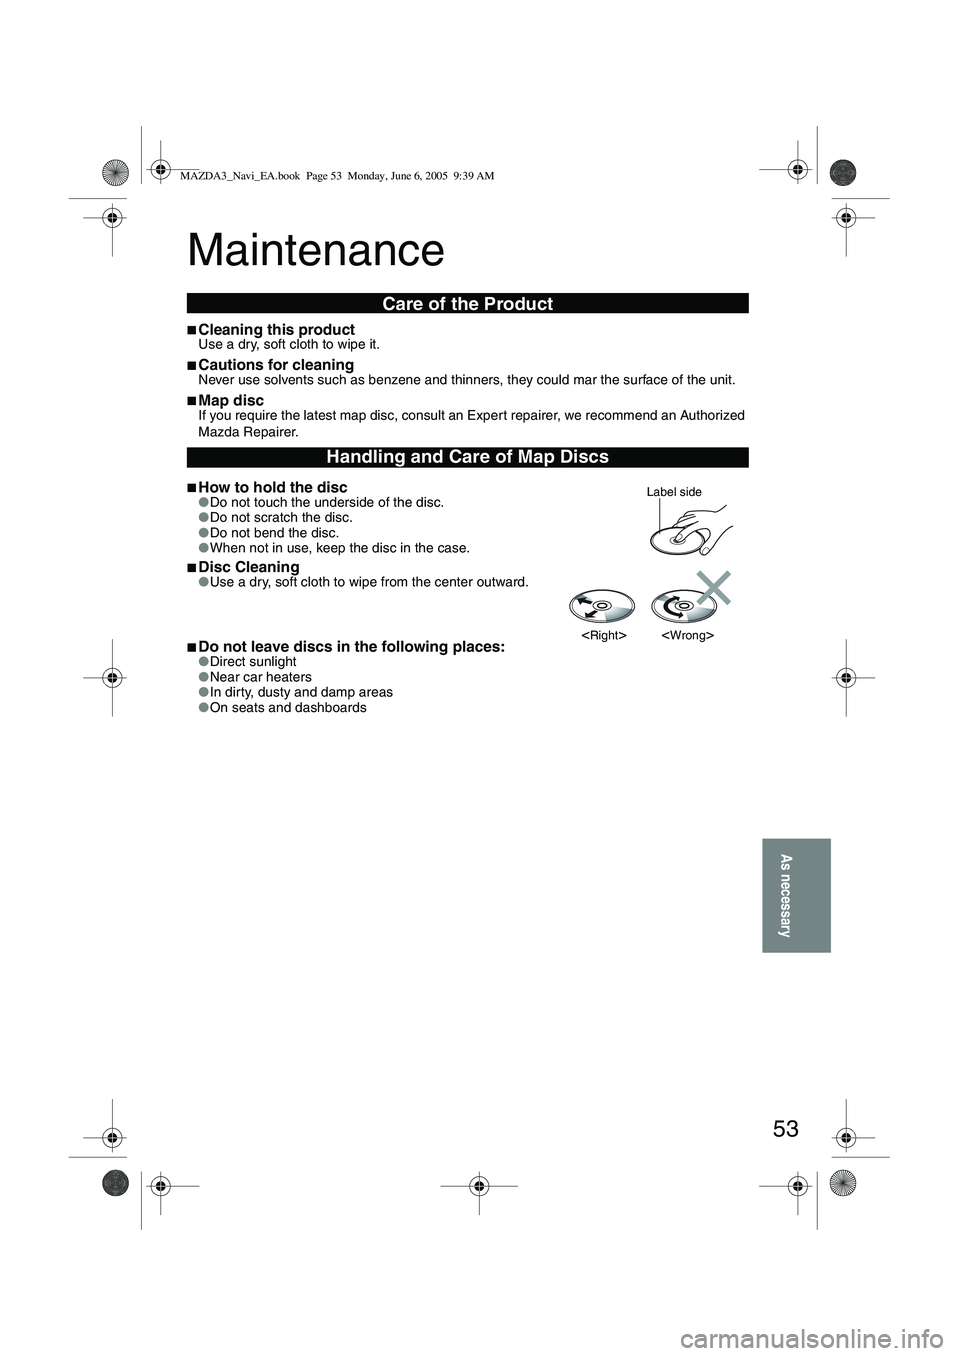 MAZDA MODEL 5 2006  Owners Manual 53
As necessary
Maintenance
■Cleaning this productUse a dry, soft cloth to wipe it.
■Cautions for cleaningNever use solvents such as benzene and thinners, they could mar the surface of the unit.
�